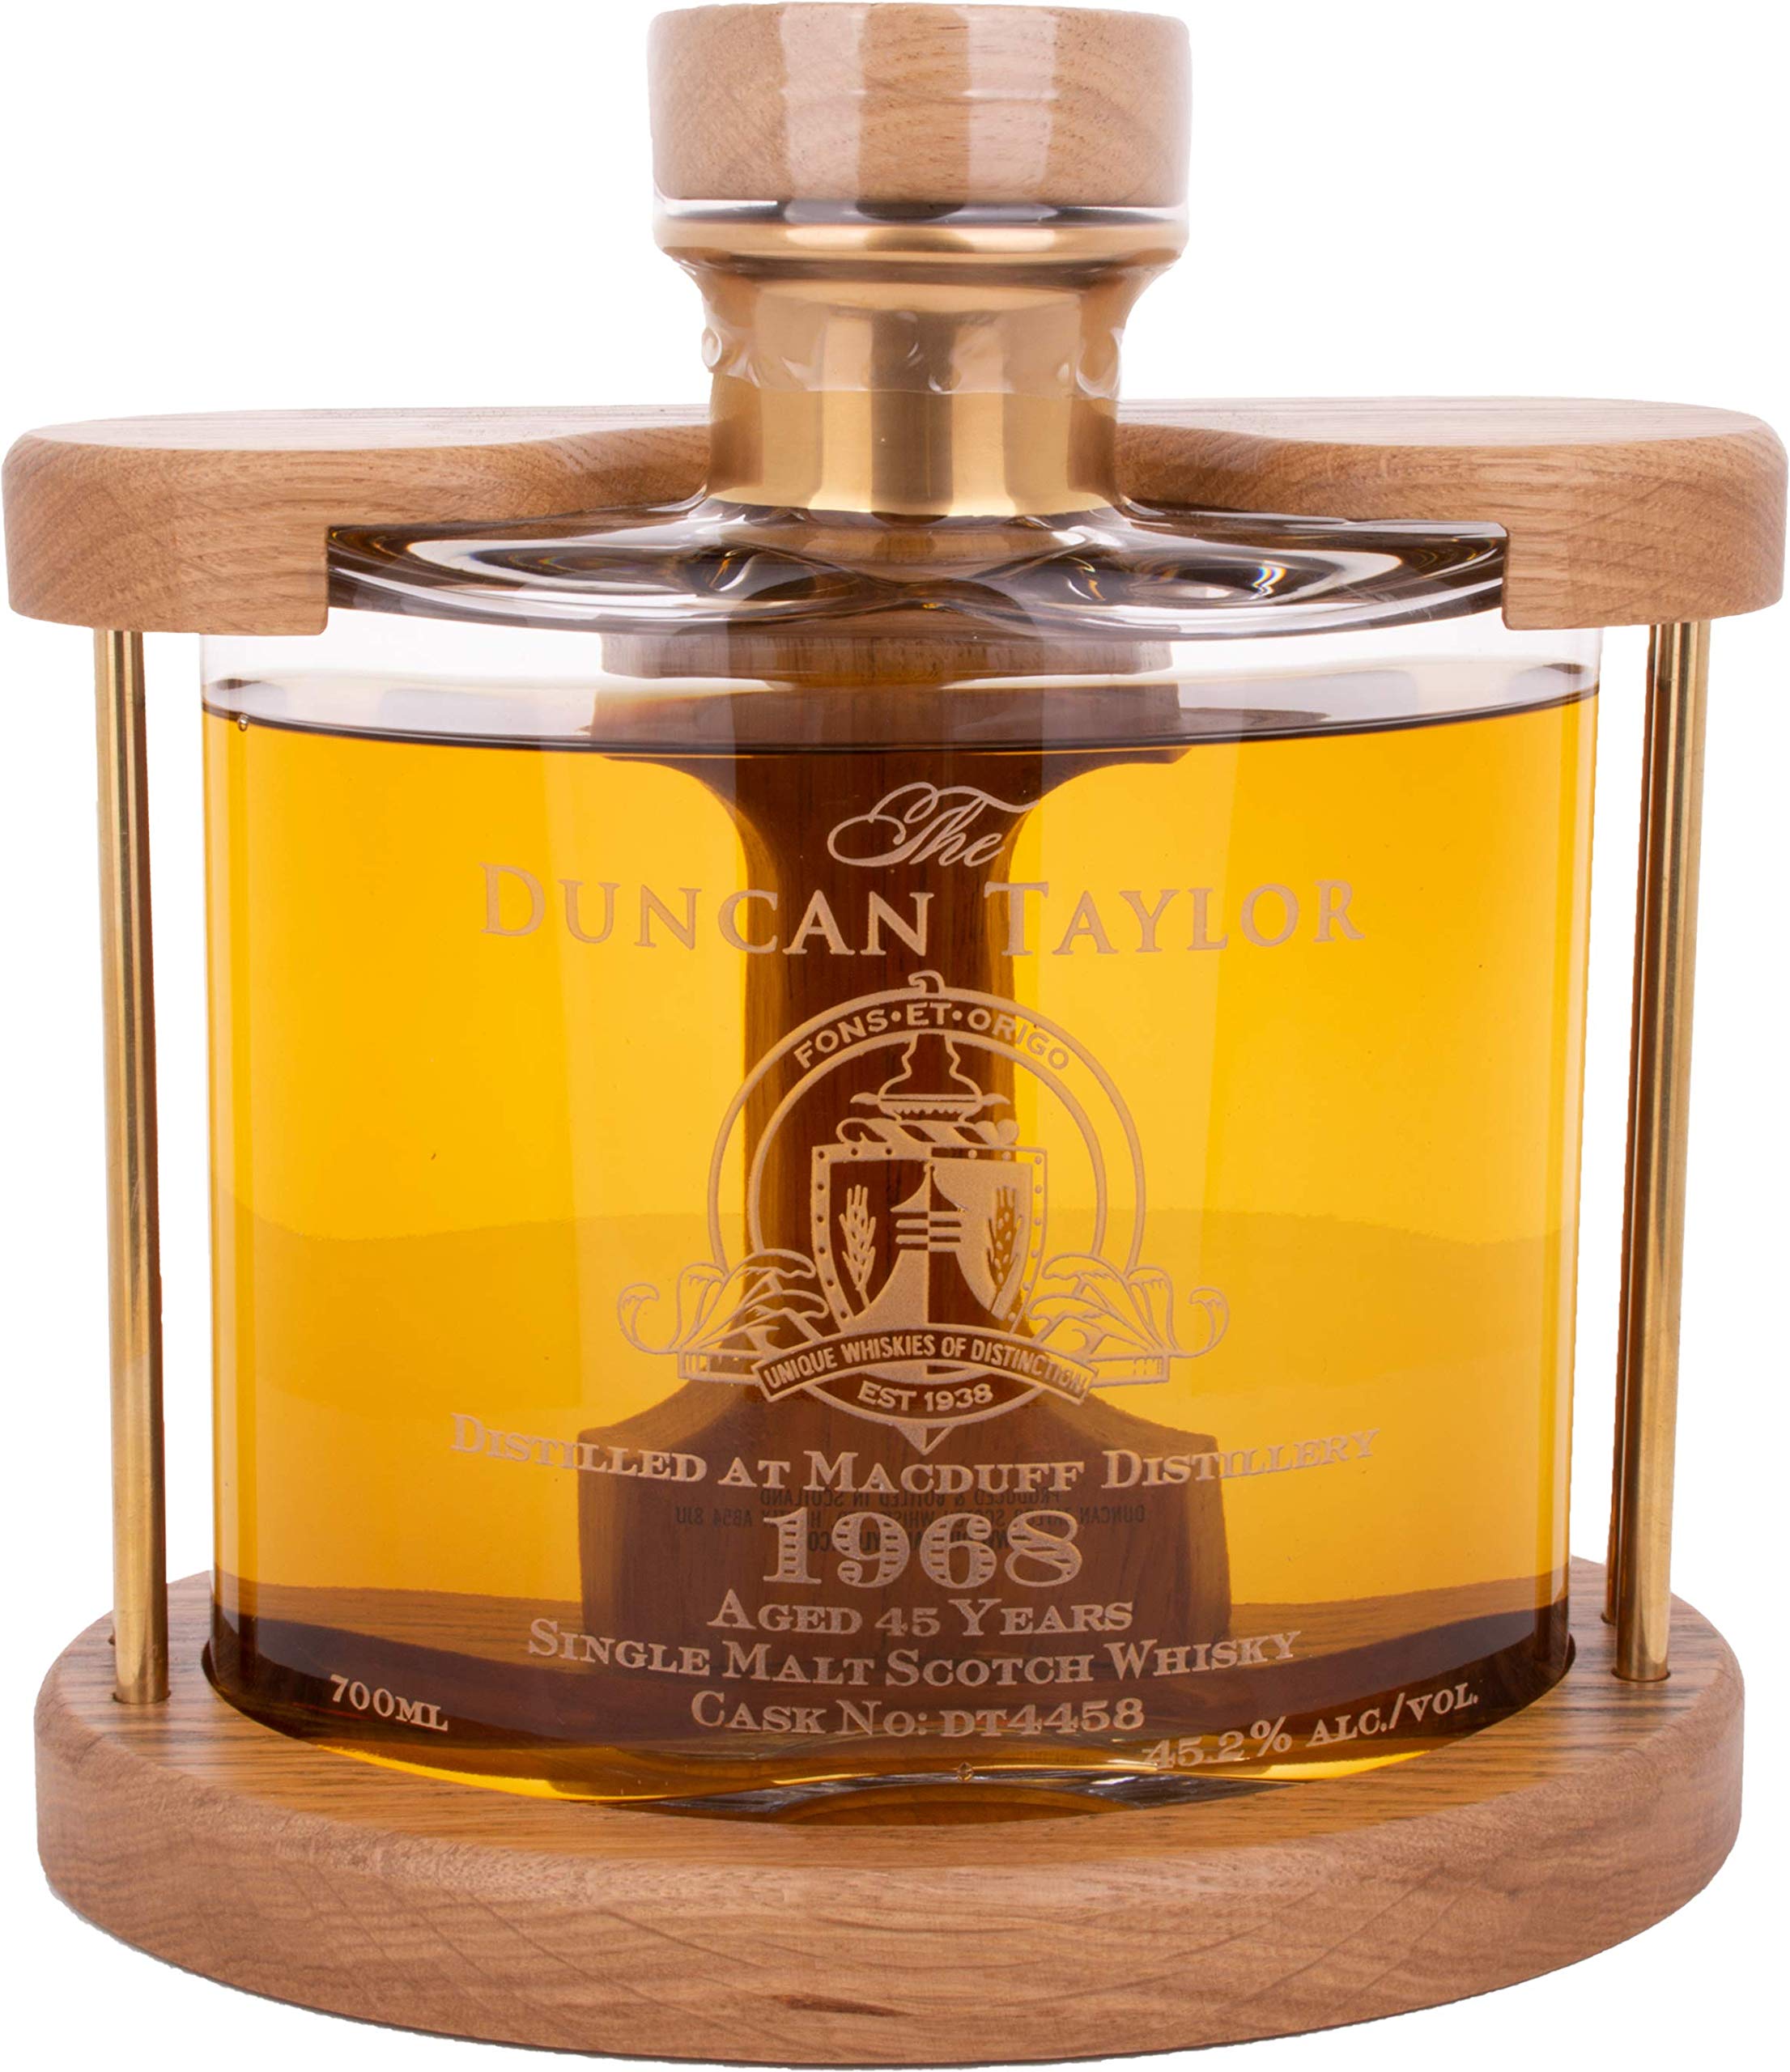 Duncan Taylor MACDUFF 45 Years Old Tantalus 1968 Whisky (1 x 0.7 l)